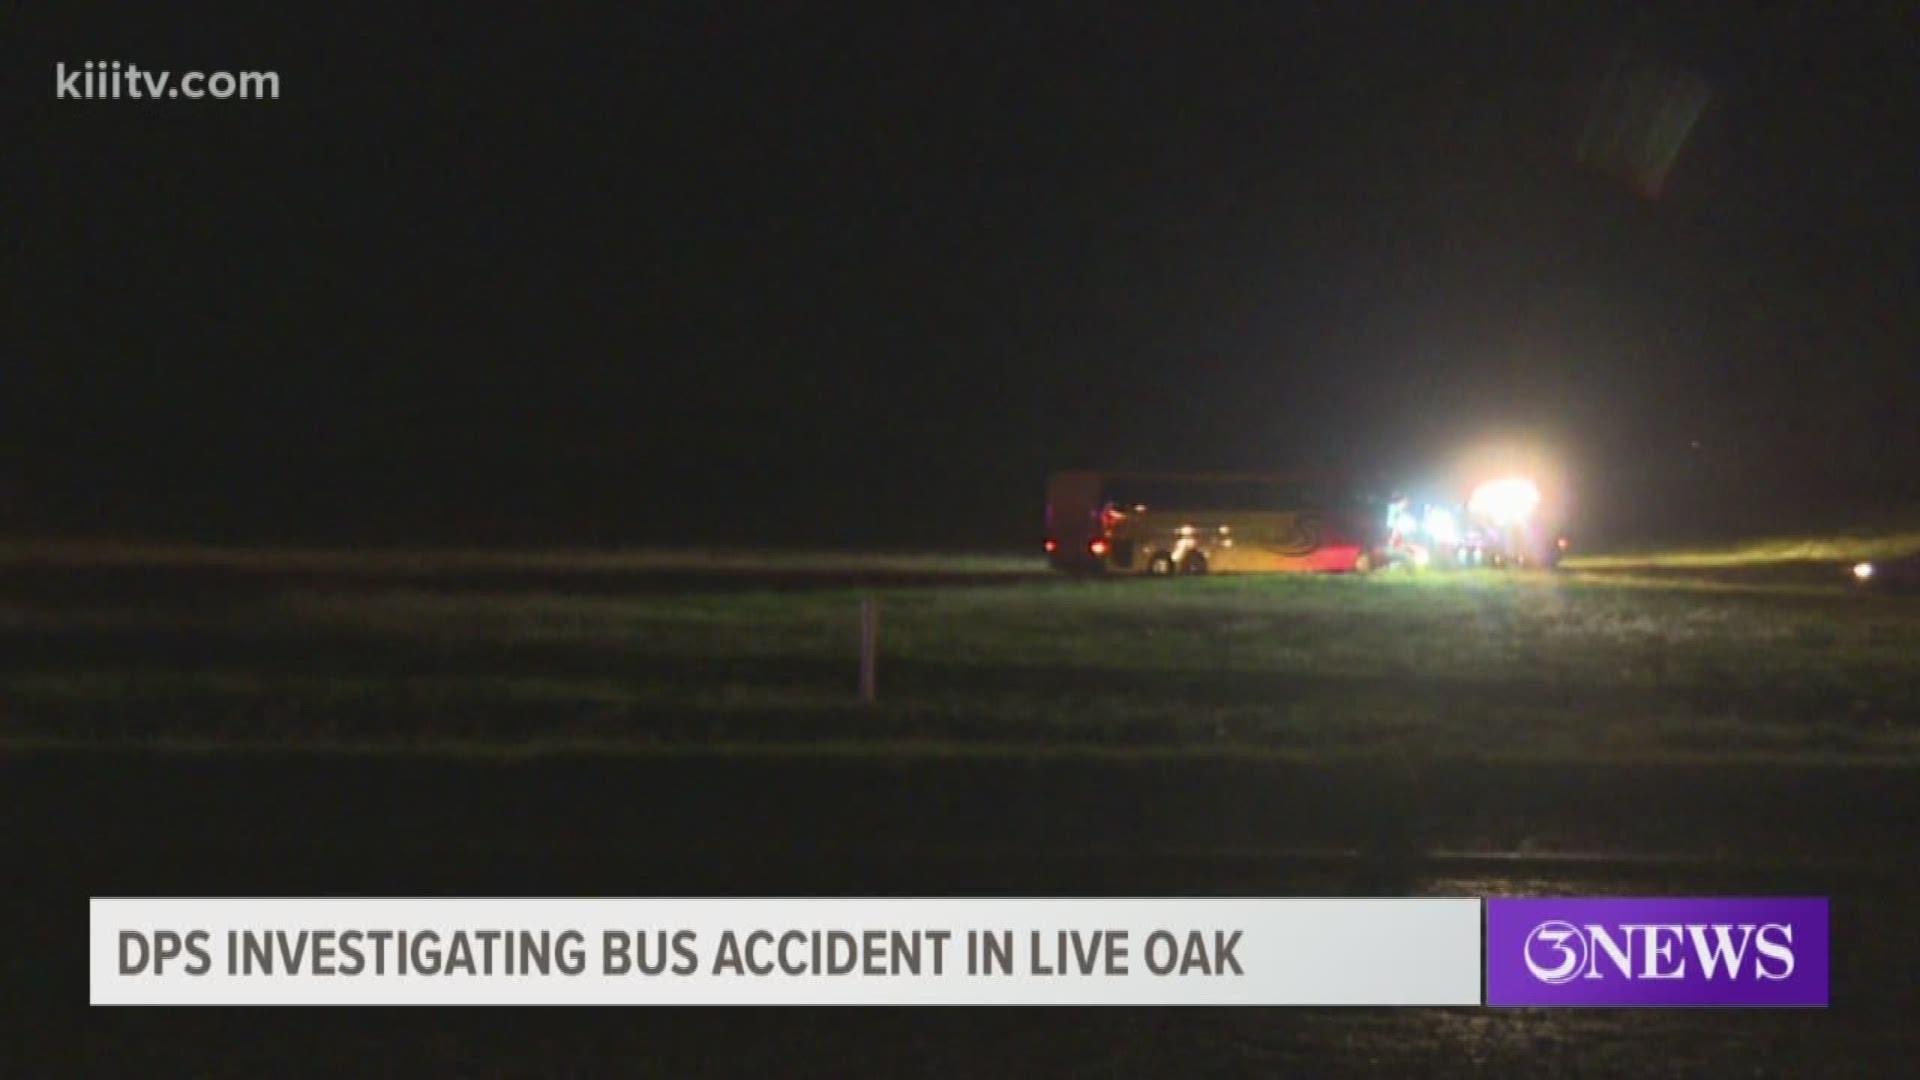 The accident happened just after 9 p.m. Wednesday on U.S. Highway 59 about three miles south of George West.